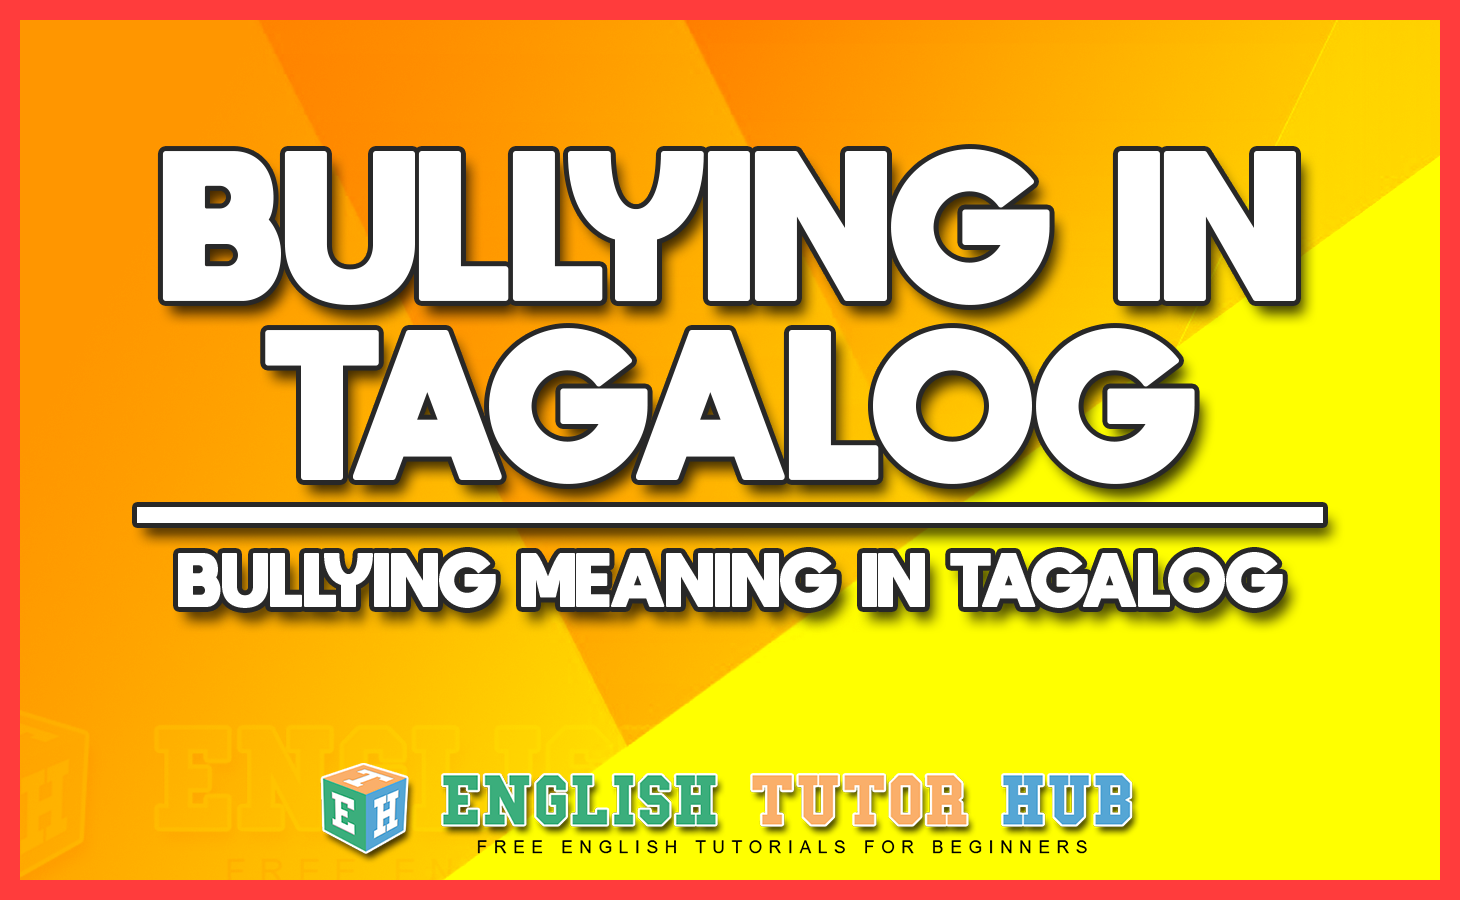 Bullying in Tagalog - Bullying Meaning in Tagalog